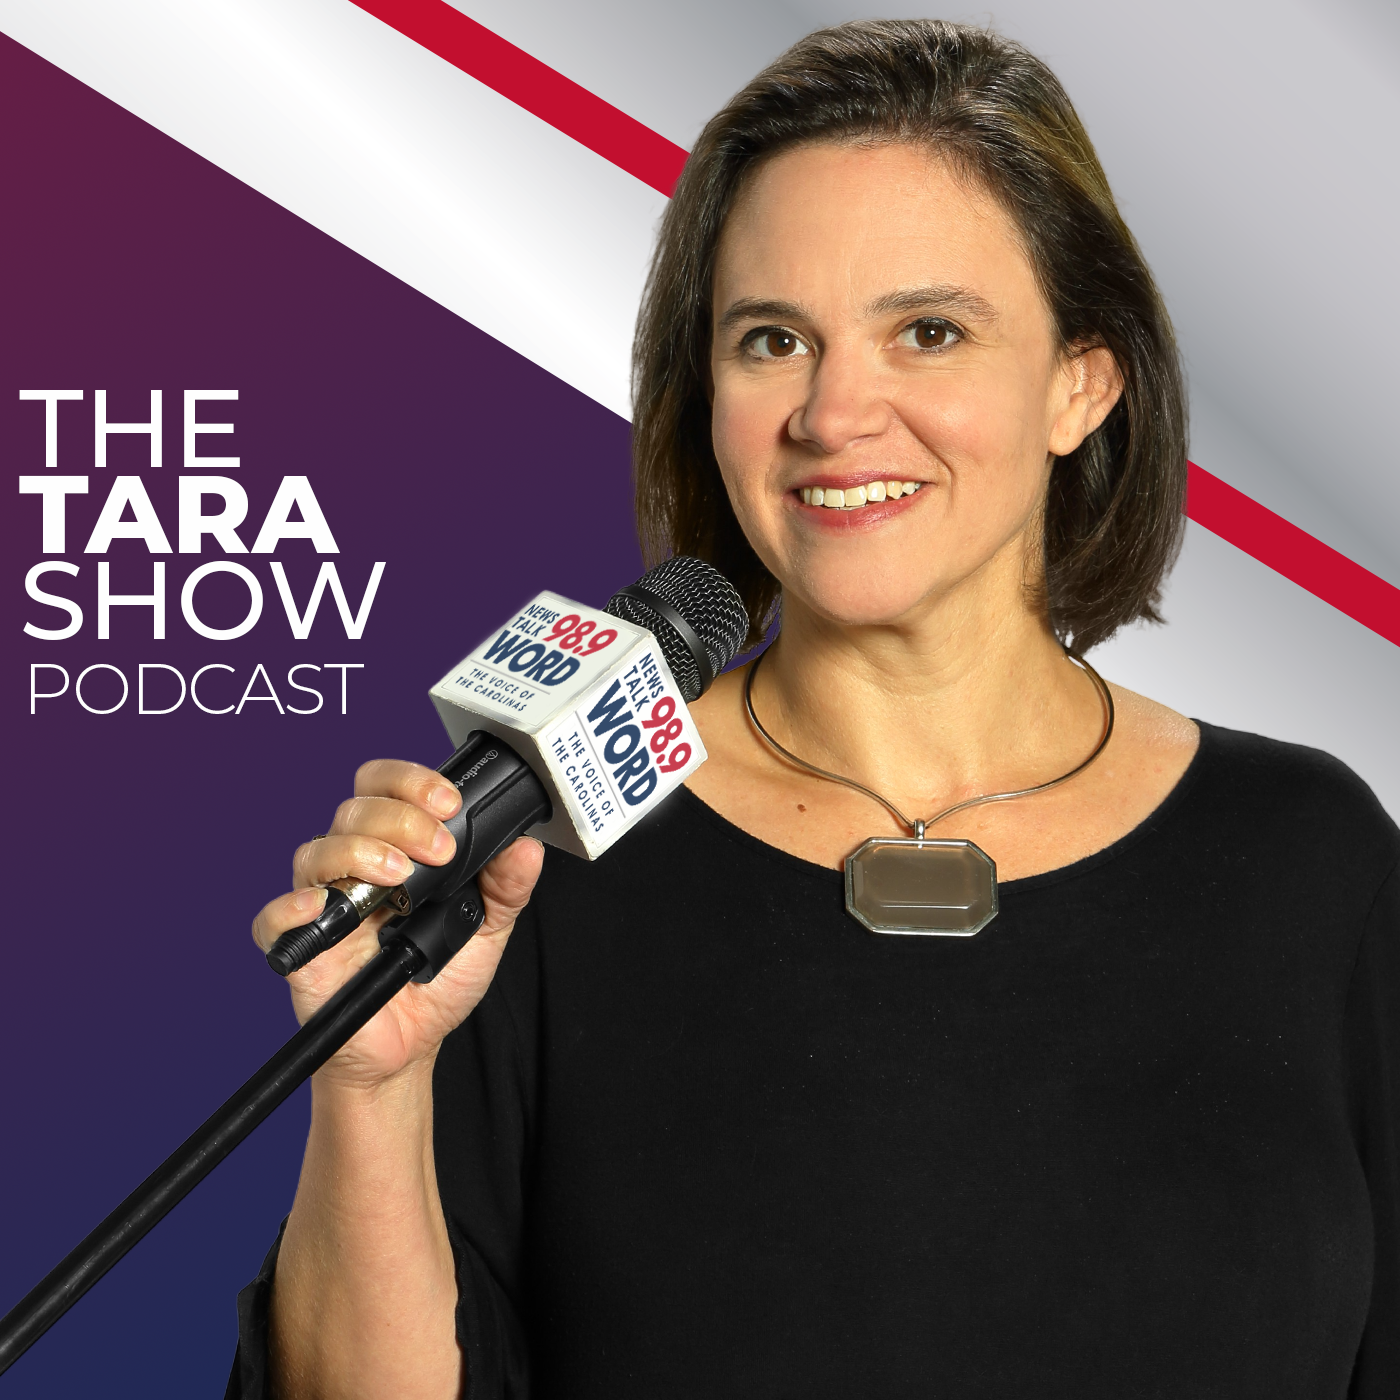 Hour 3: The Tara Show - “The Jewish Perspective with Alan from Greer” “The Betrayal of Mike Johnson” “Where we are in the Trump Trial” “The Lies of Michael Cohen”